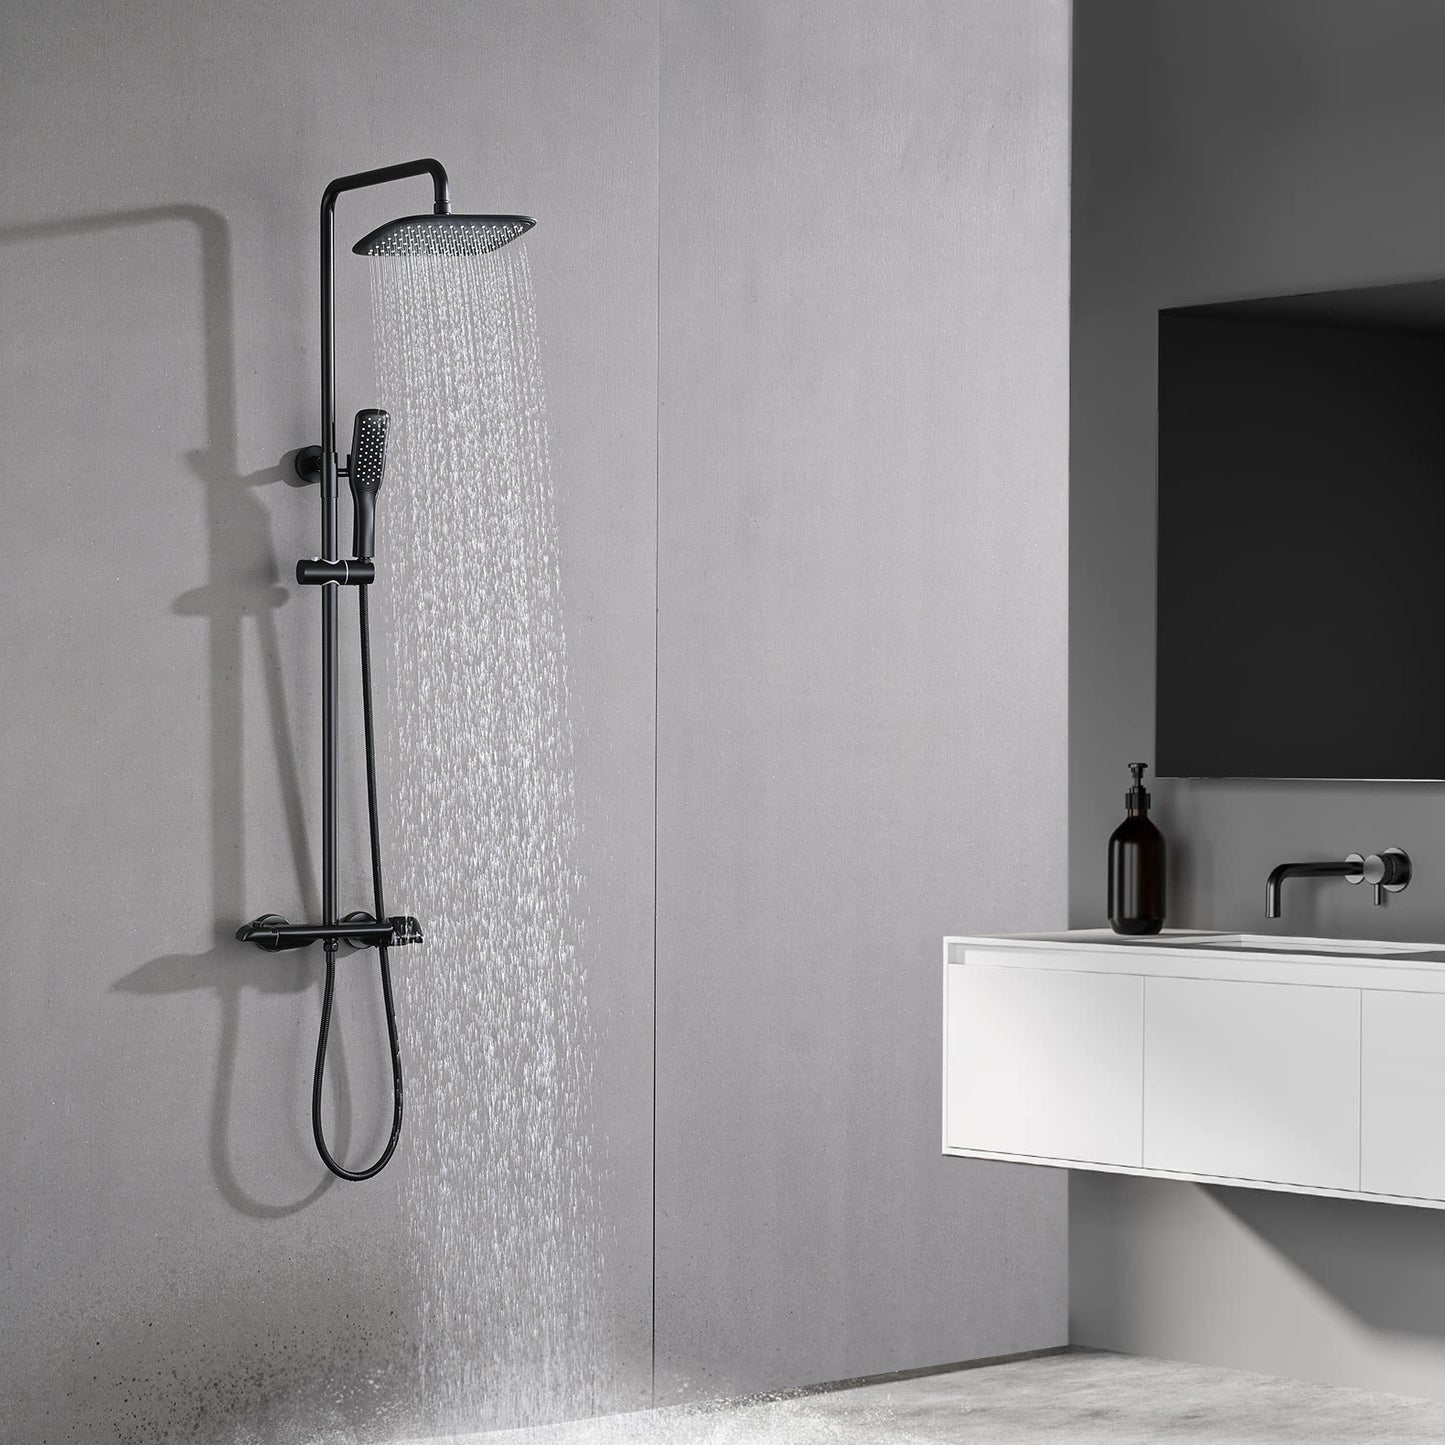 Luxurious Matte Black Wall-Mounted Shower Combo Set With Dual Shower Options